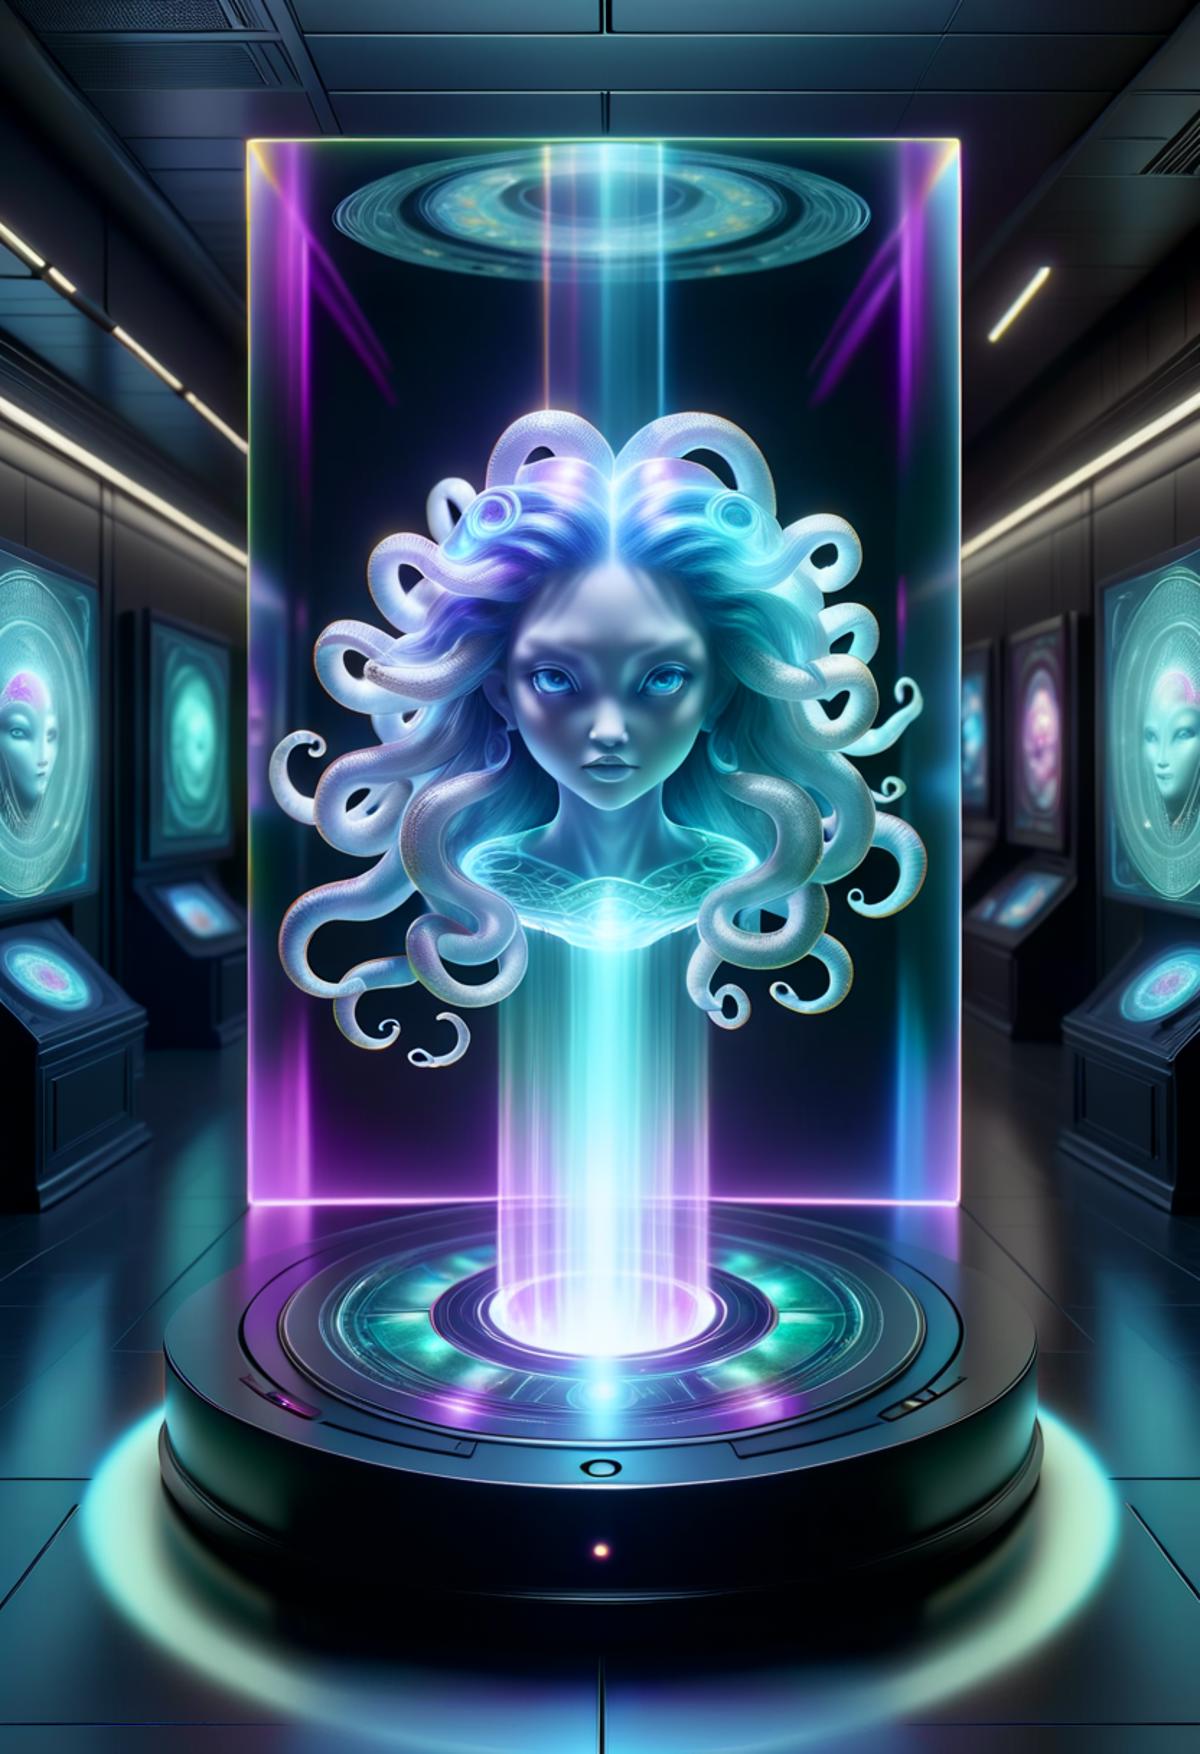 A digital art piece featuring a blue-haired female figure with long hair and blue eyes, surrounded by purple and pink lighting.